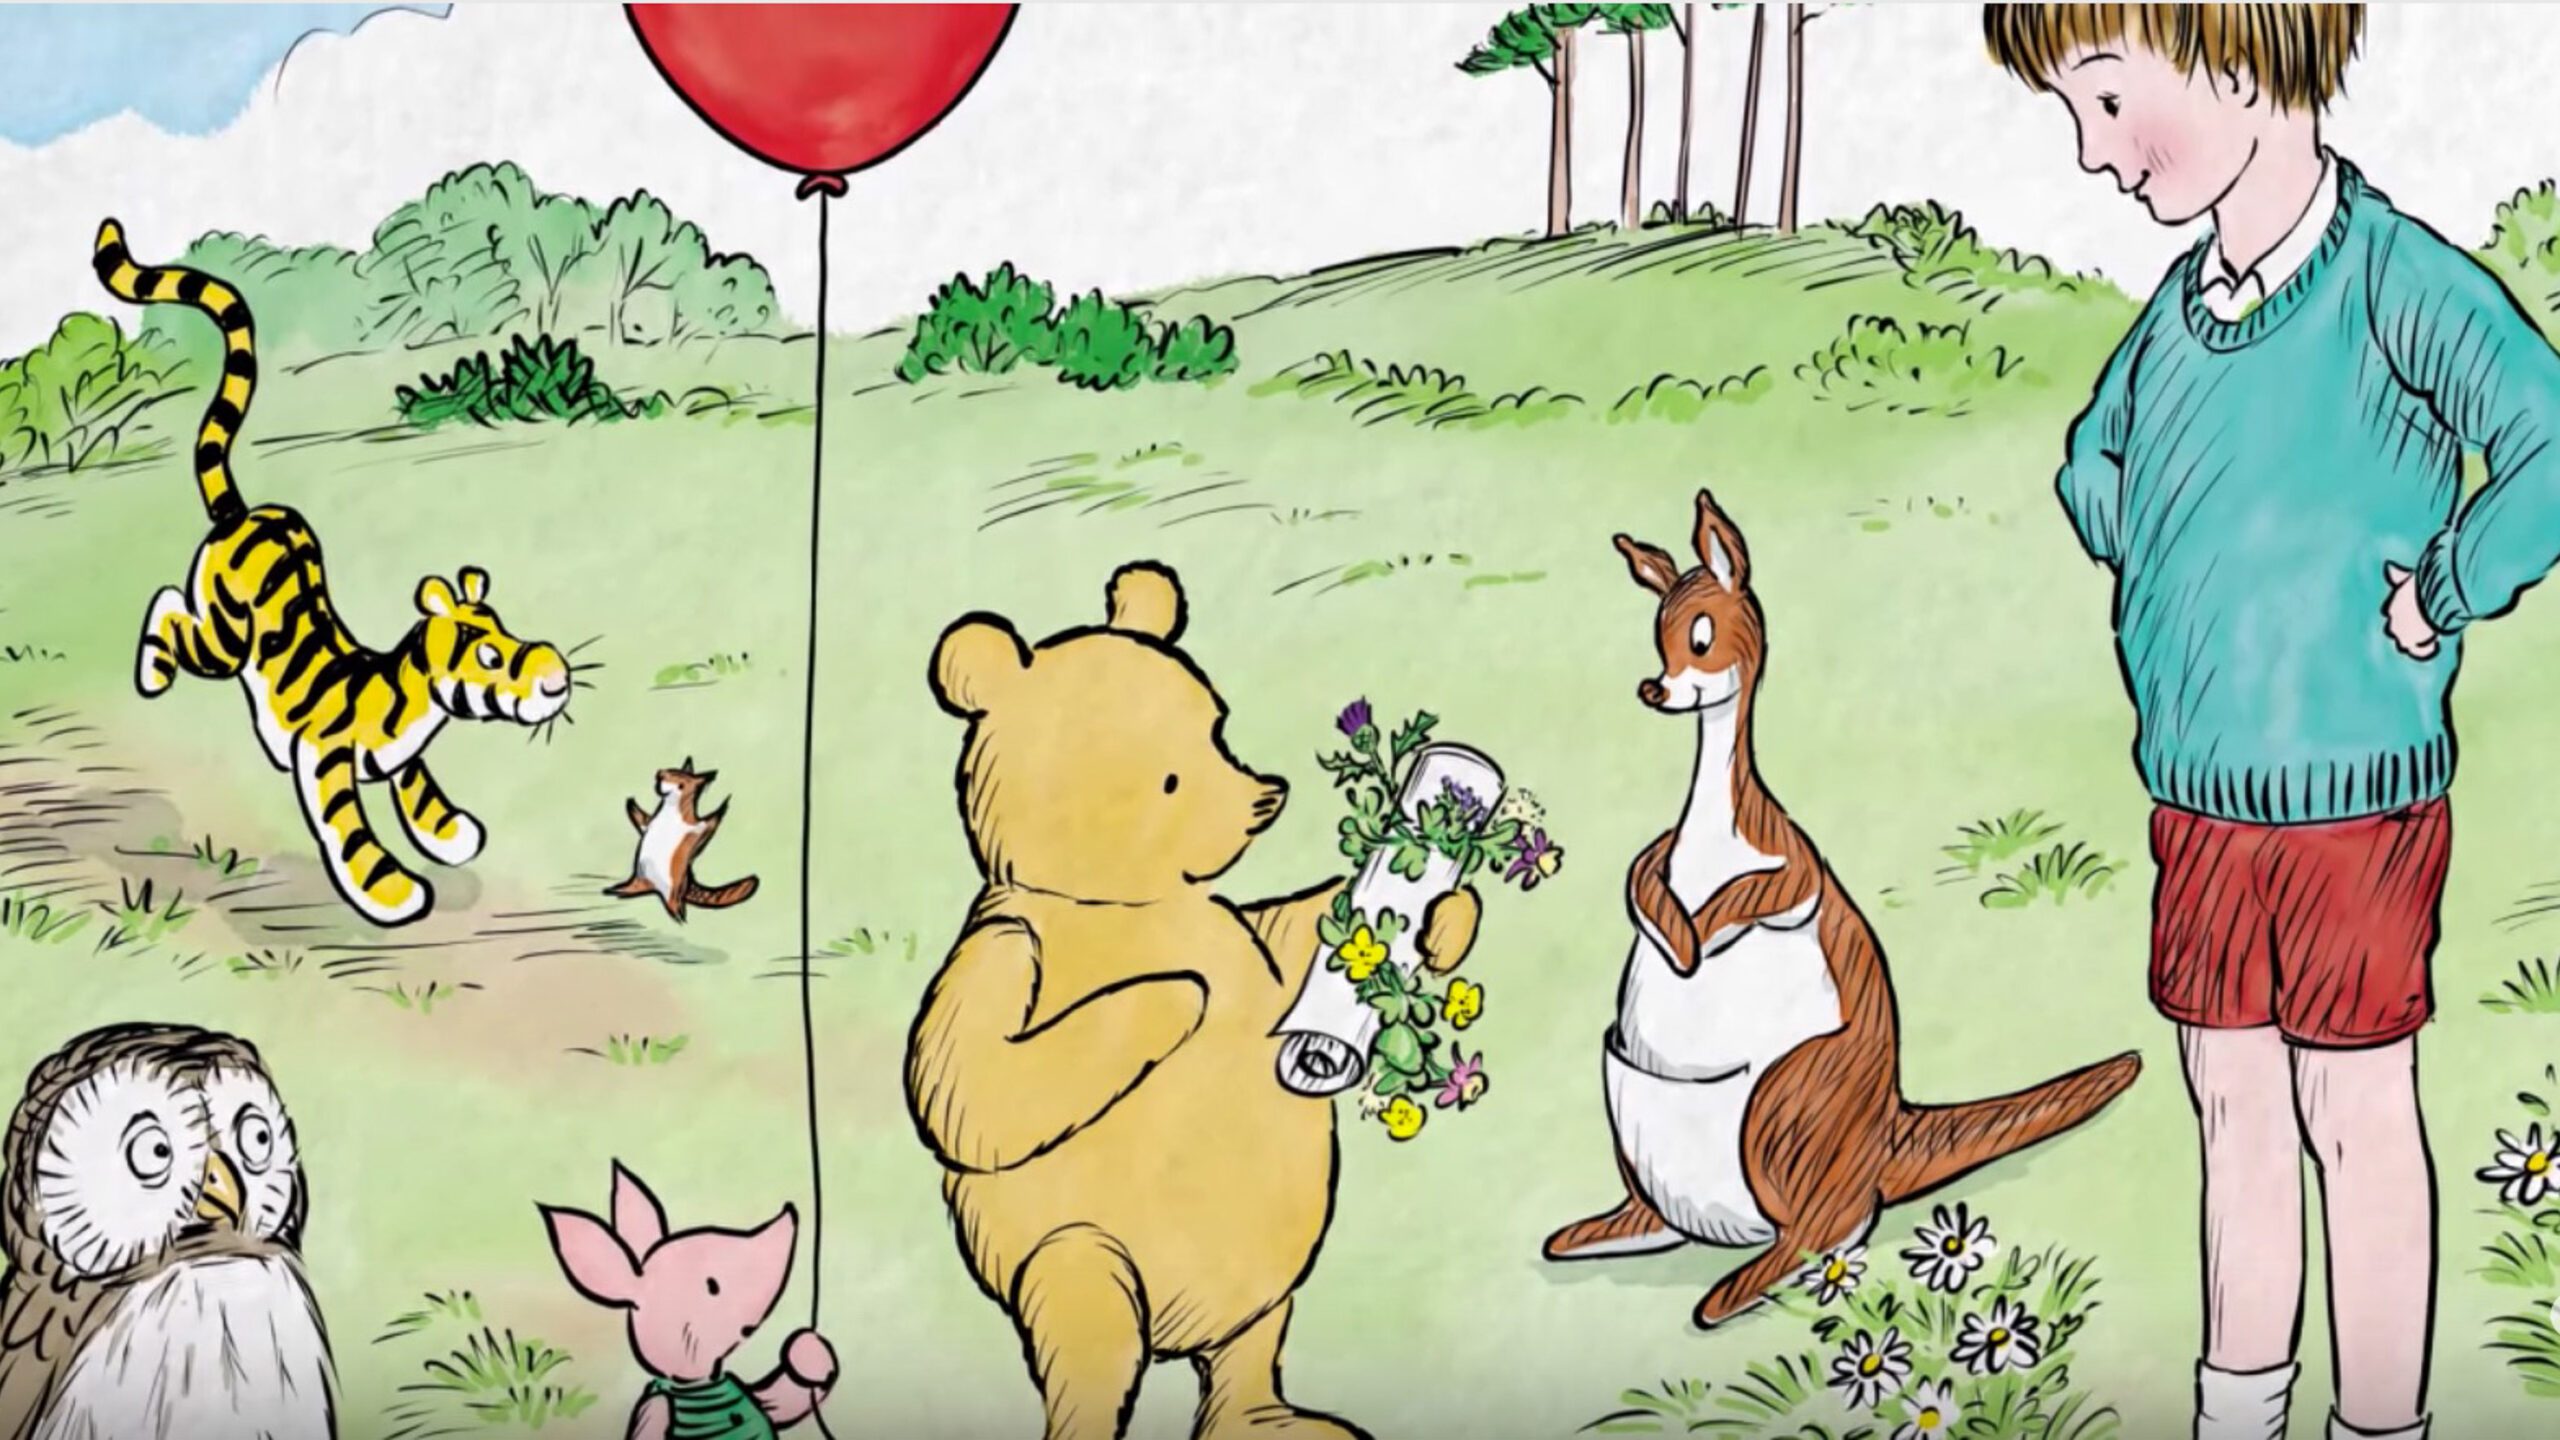 Meet the new Winnie-the-Pooh character Penguin